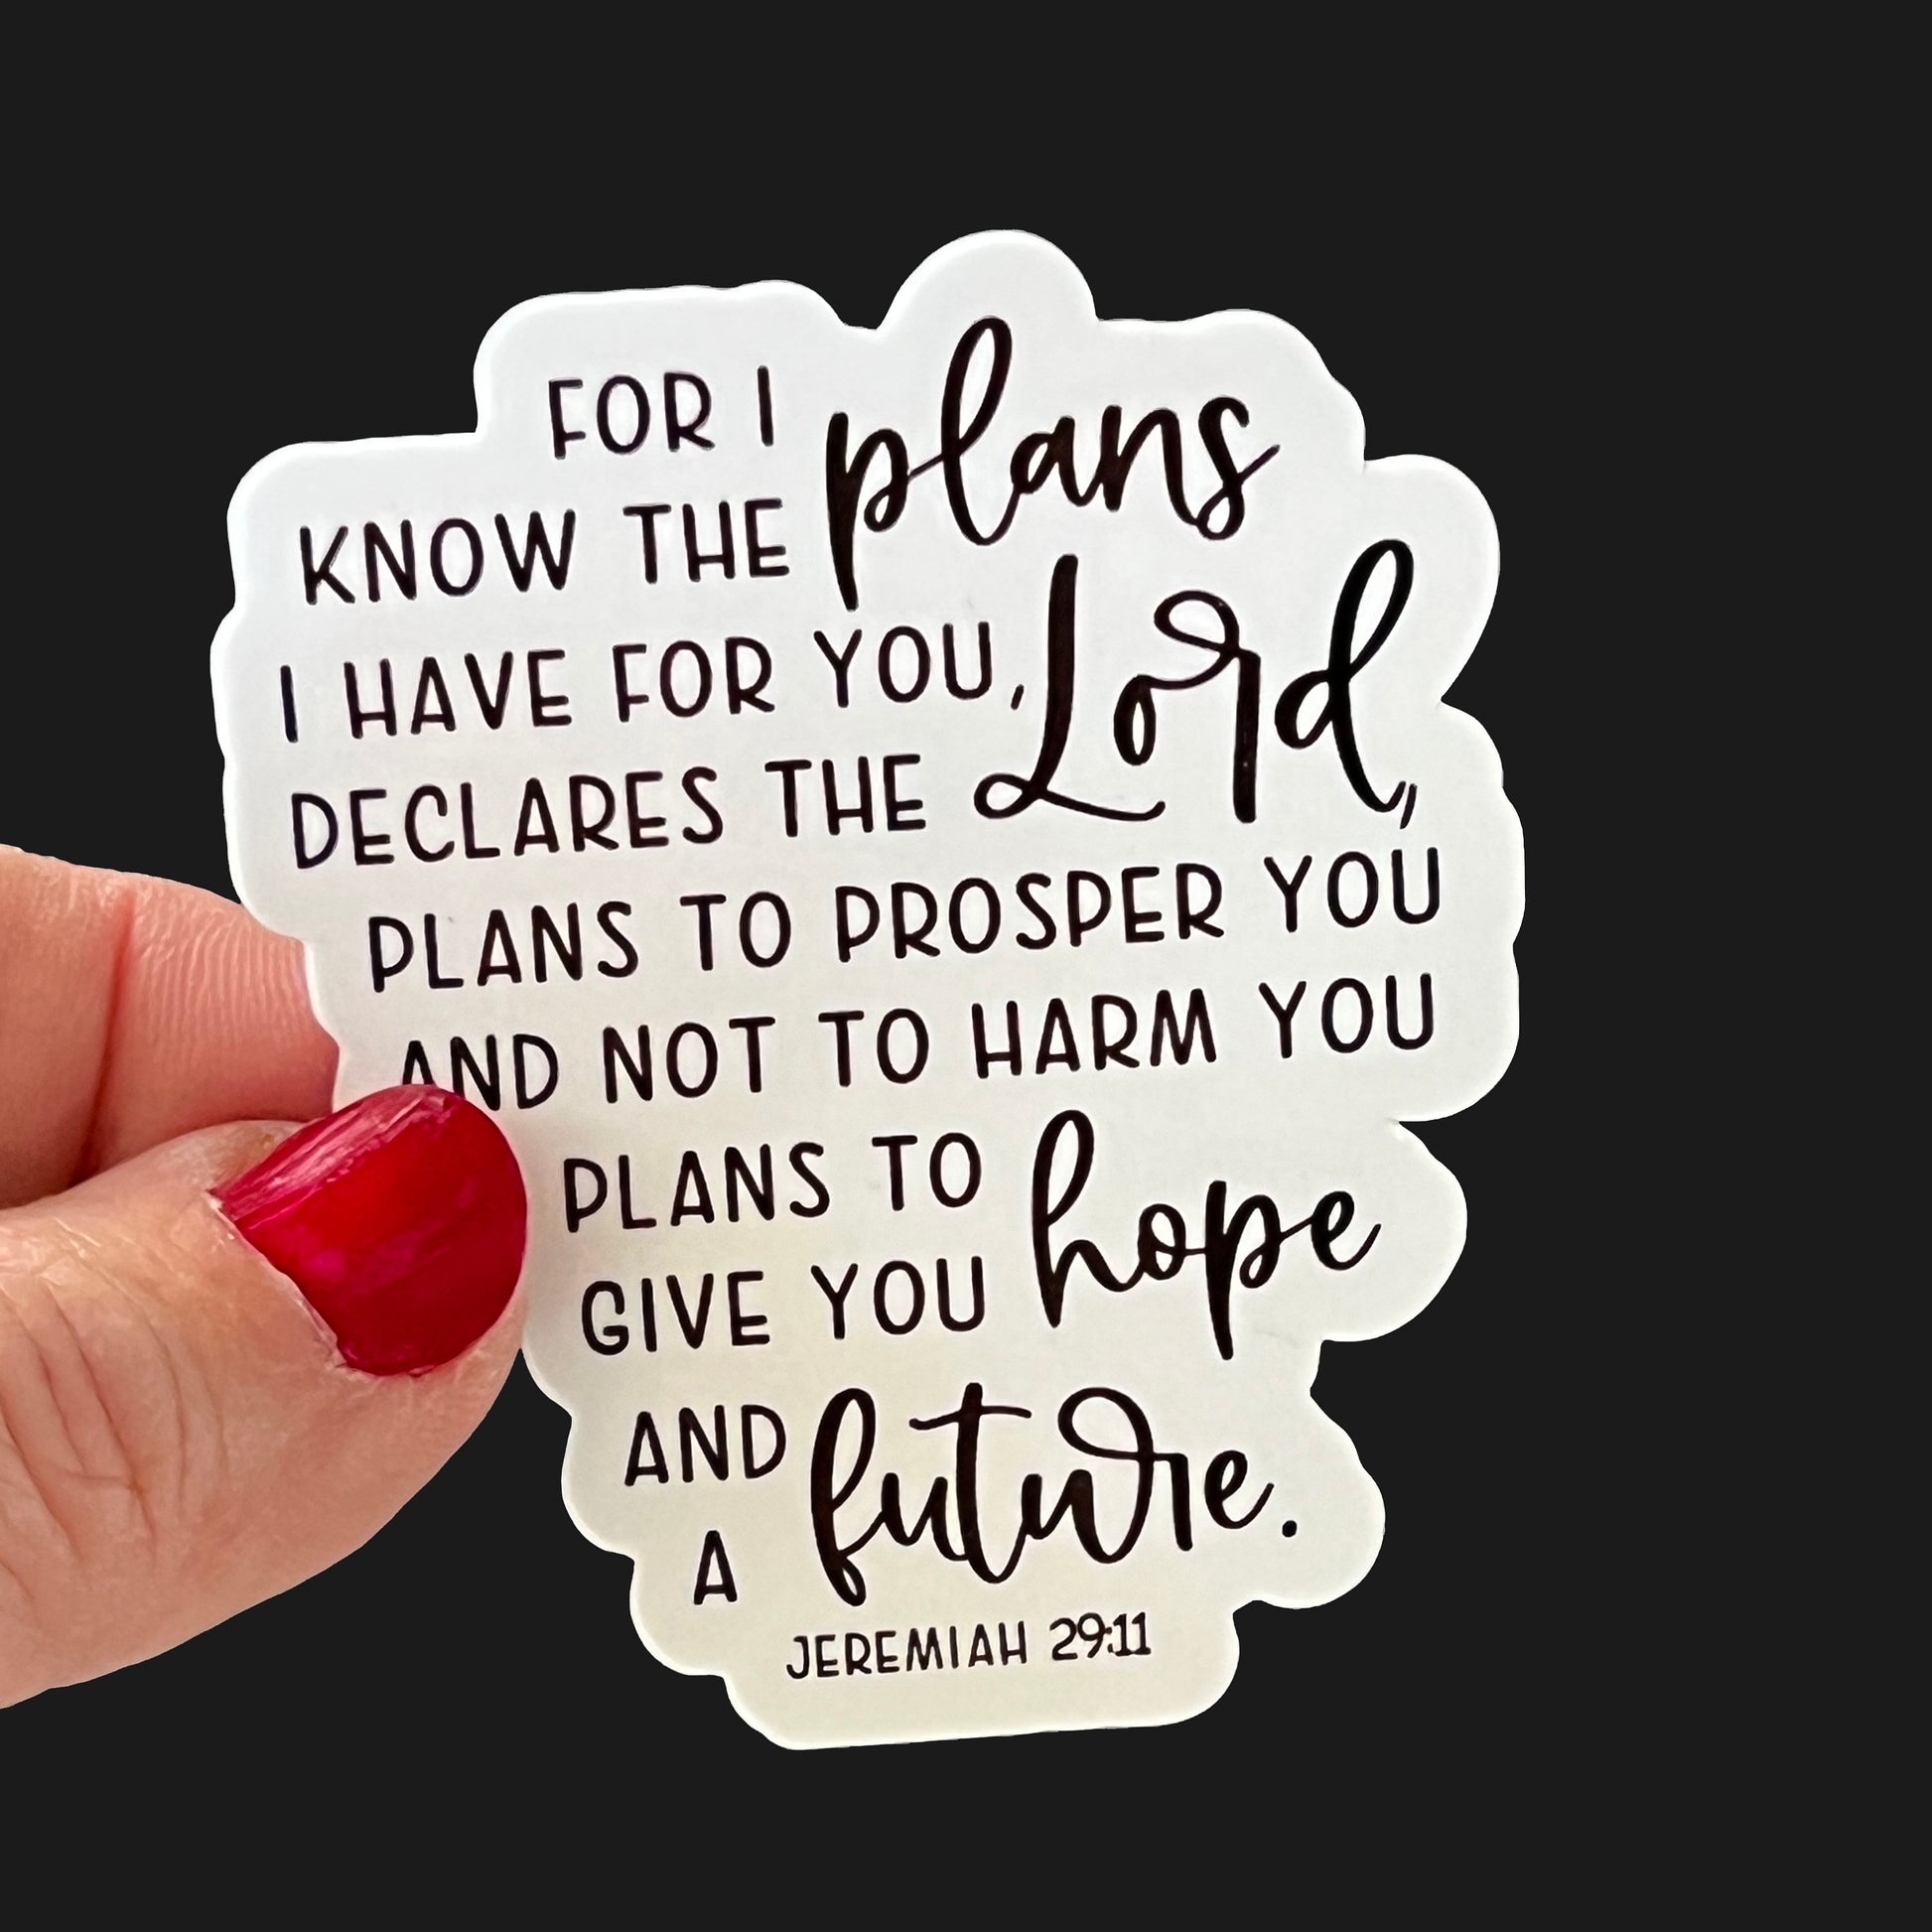 For I know the plans I have for you, Declares the Lord - Jeremiah 29:11 Sticker - 2.5" waterproof & UV Resistant - 1 sticker or bulk pack